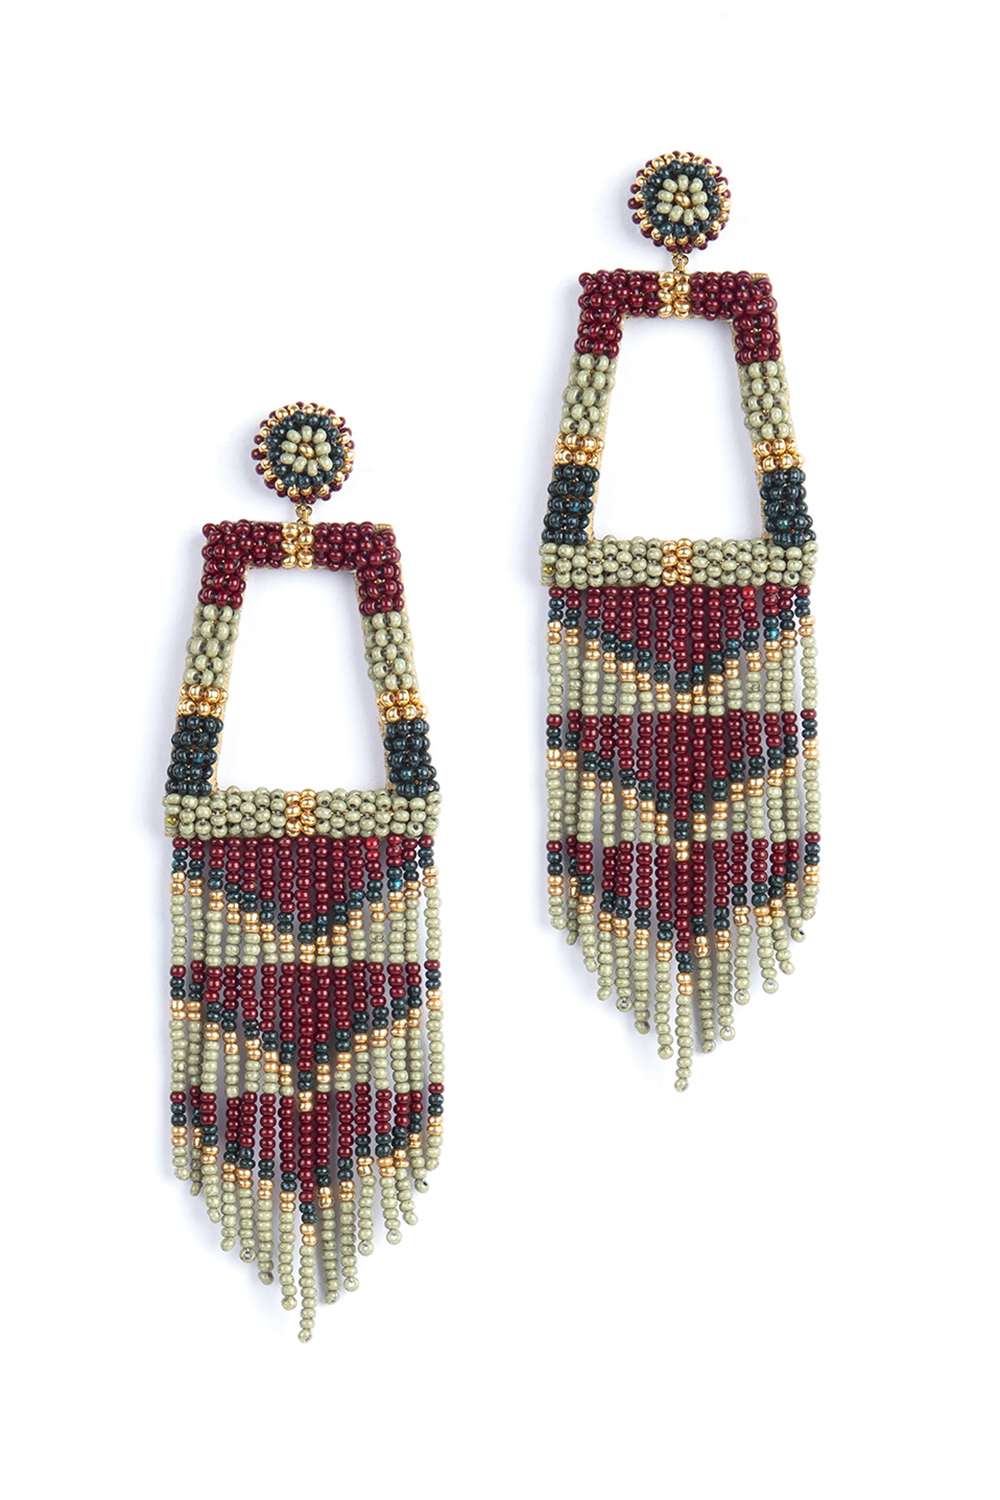 Buy Inara Earrings by NAIRA at Ogaan Online Shopping Site